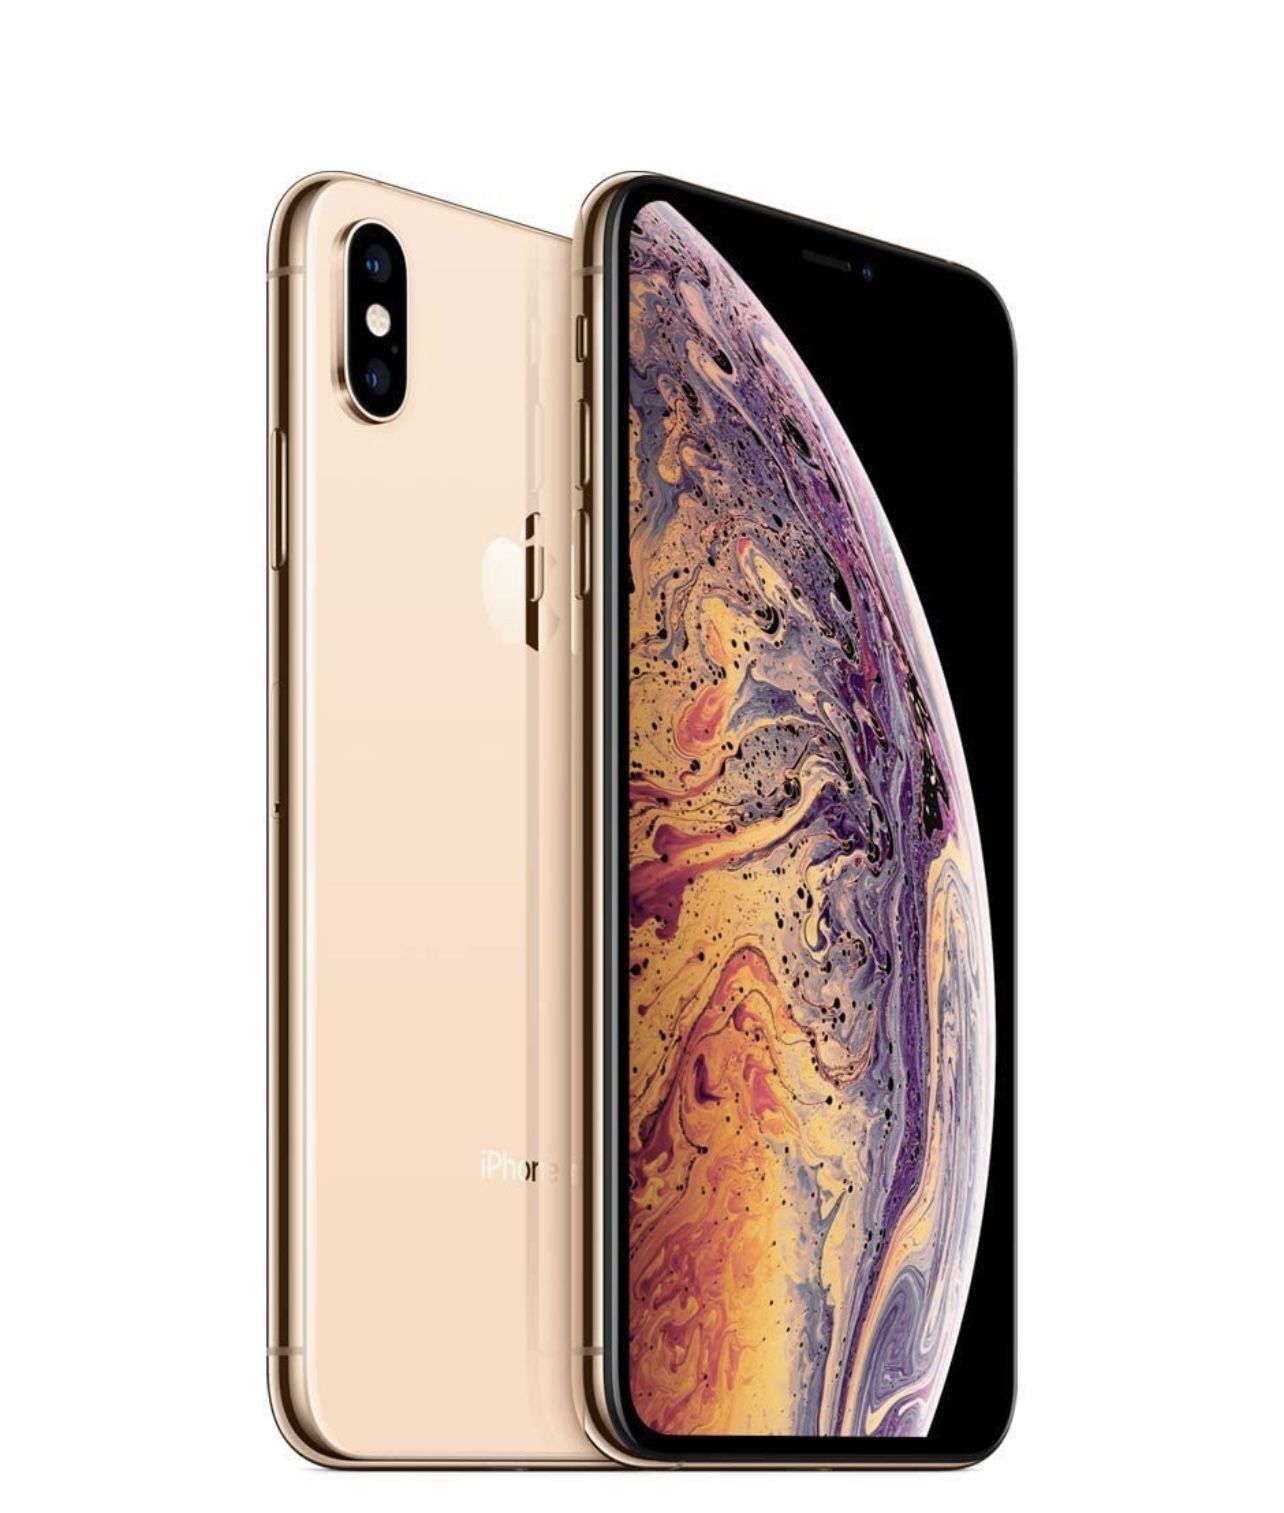 Refurbished Apple iPhone XS Max 64 GB in Gold for Unlocked